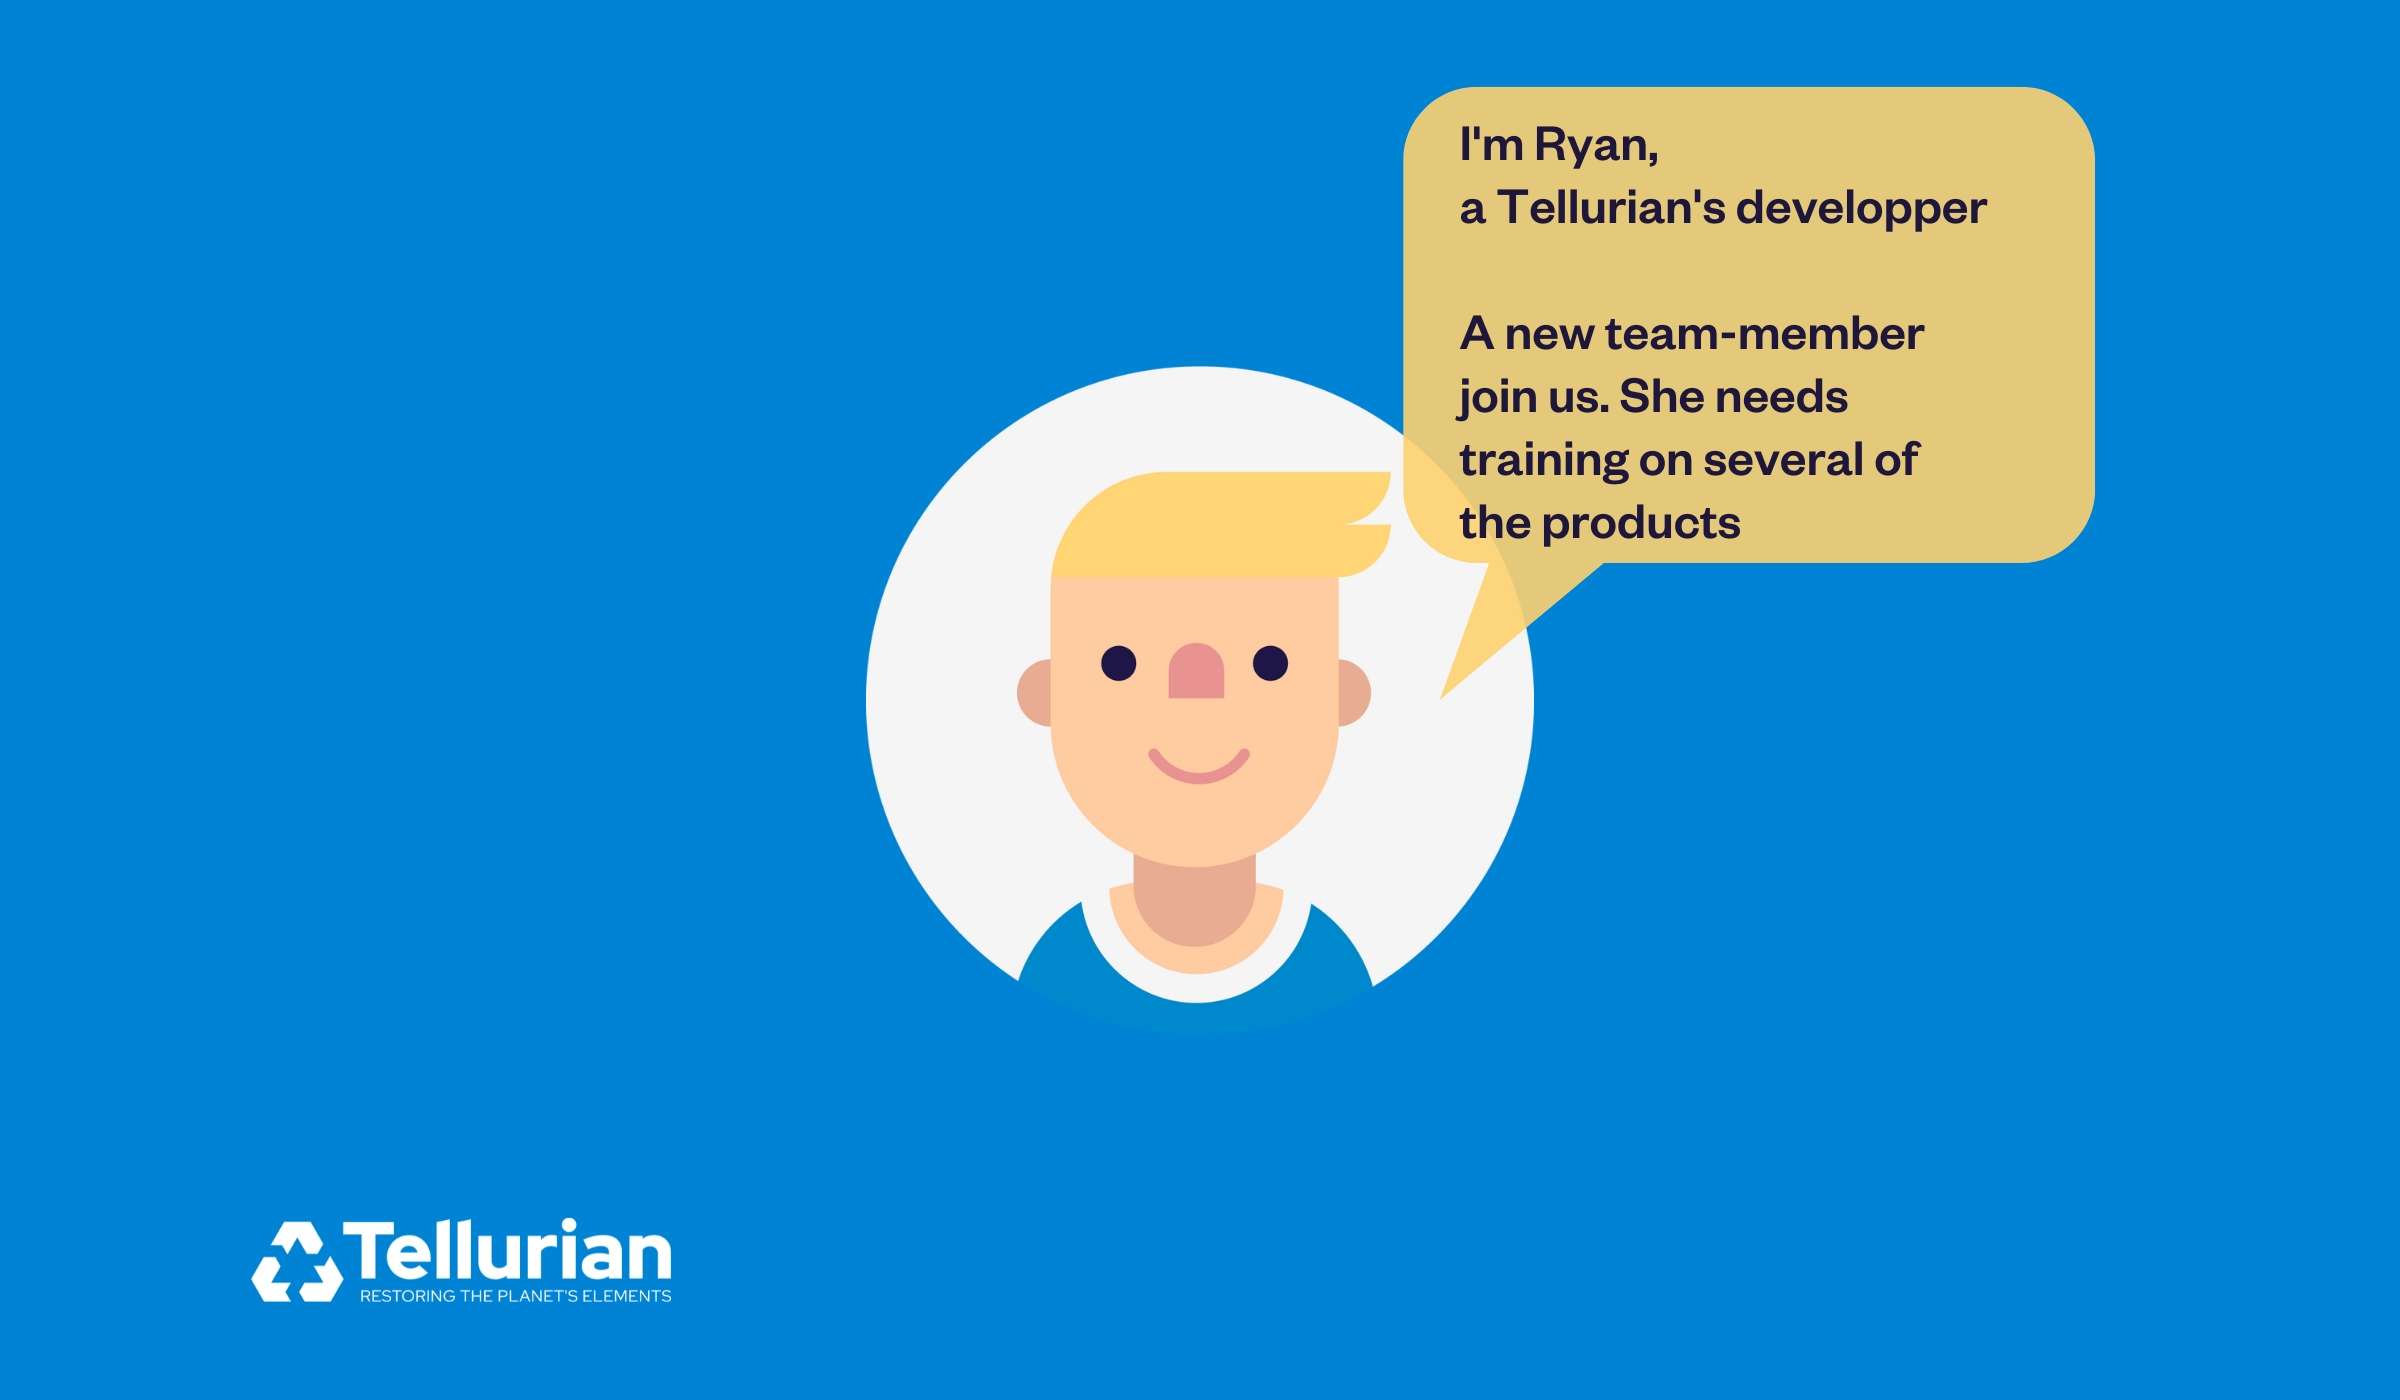 Meet Ryan! A new employee will join his team shortly and will need training upon their arrival, so Ryan will create a ticket in Jira for the HR team to schedule all the relevant training sessions. 